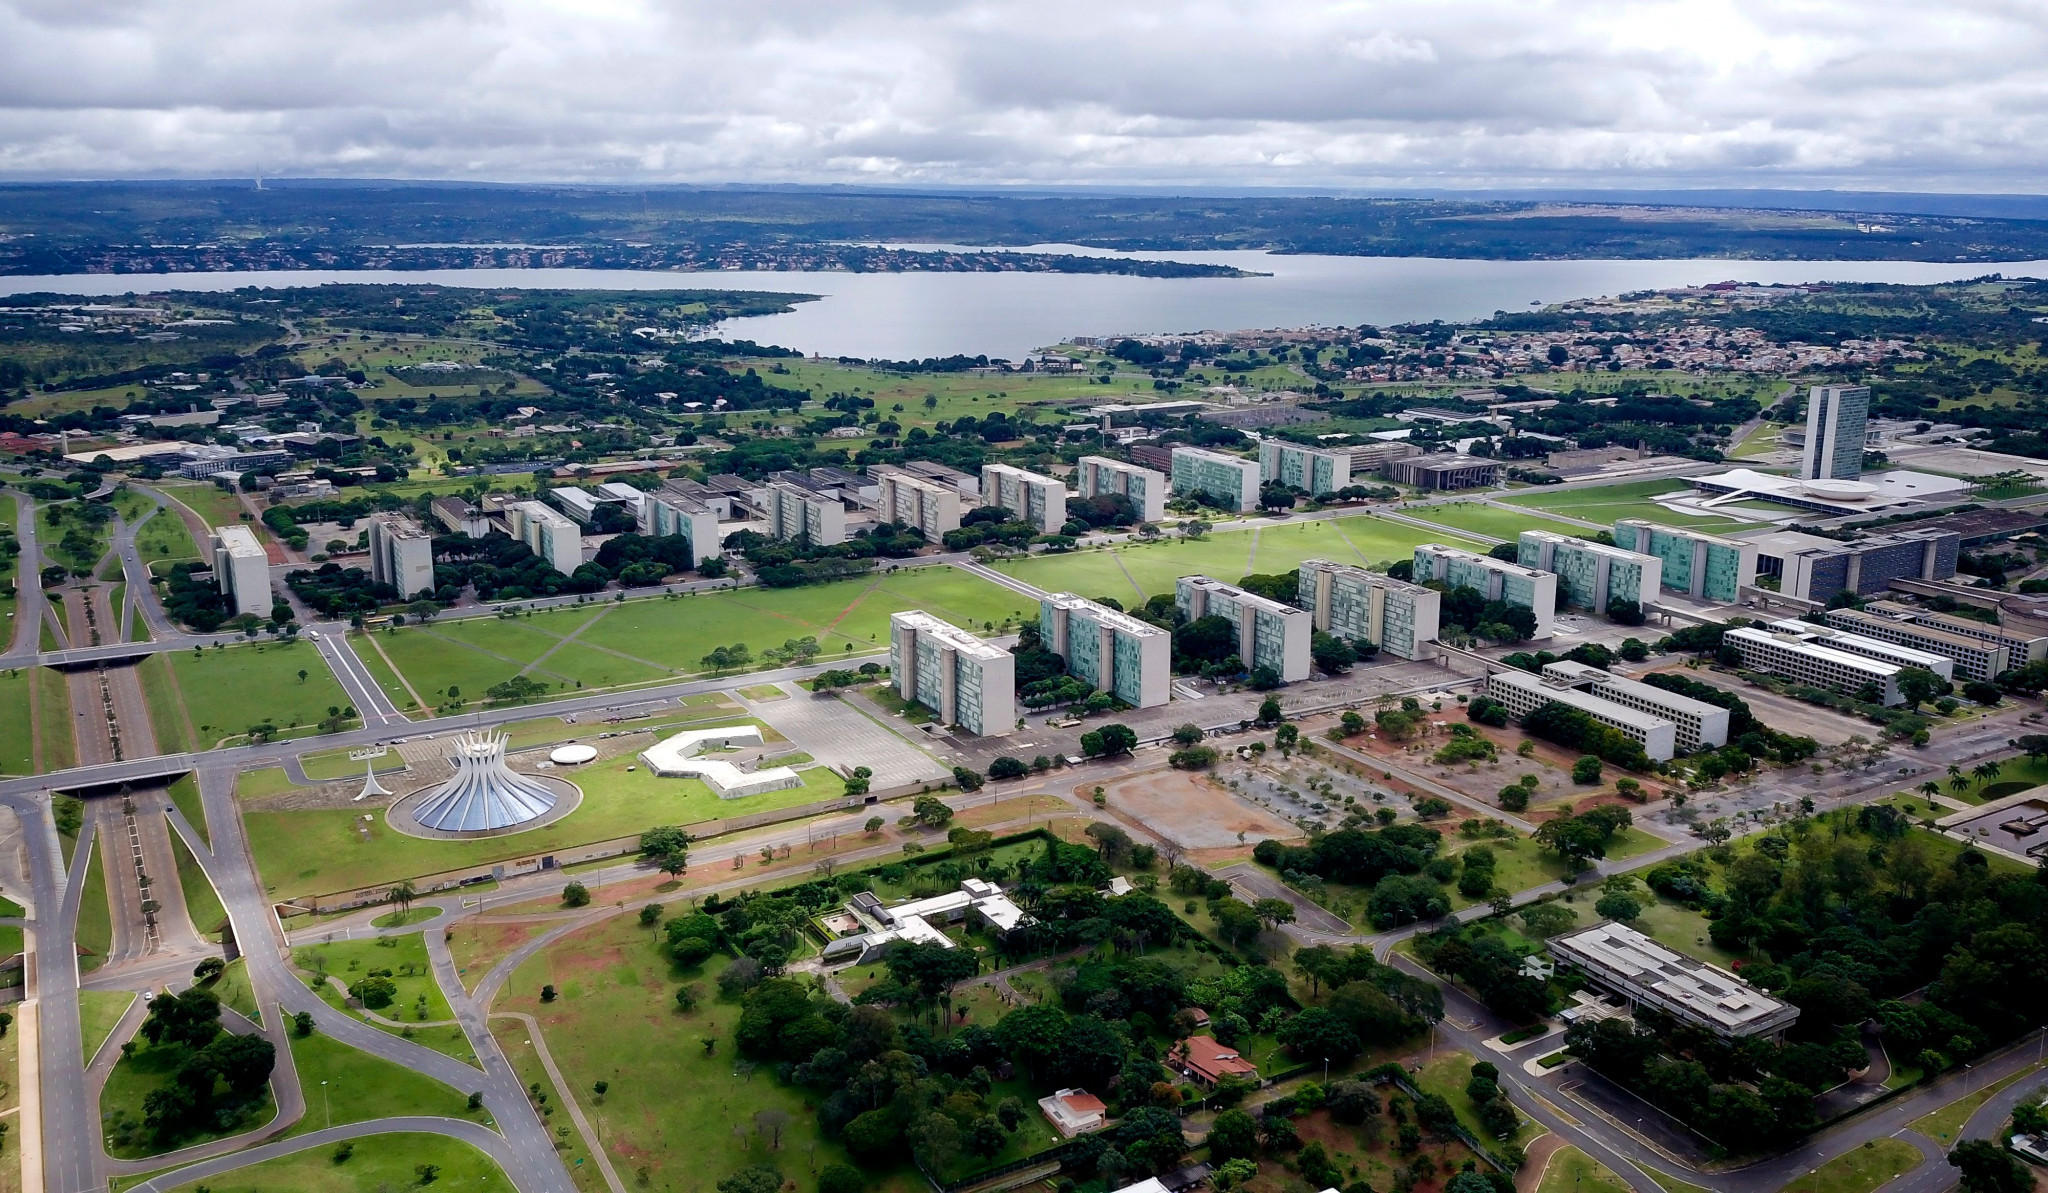 Brasilia is one of two cities chosen to stage FIBA AmeriCup games this year ©Getty Images